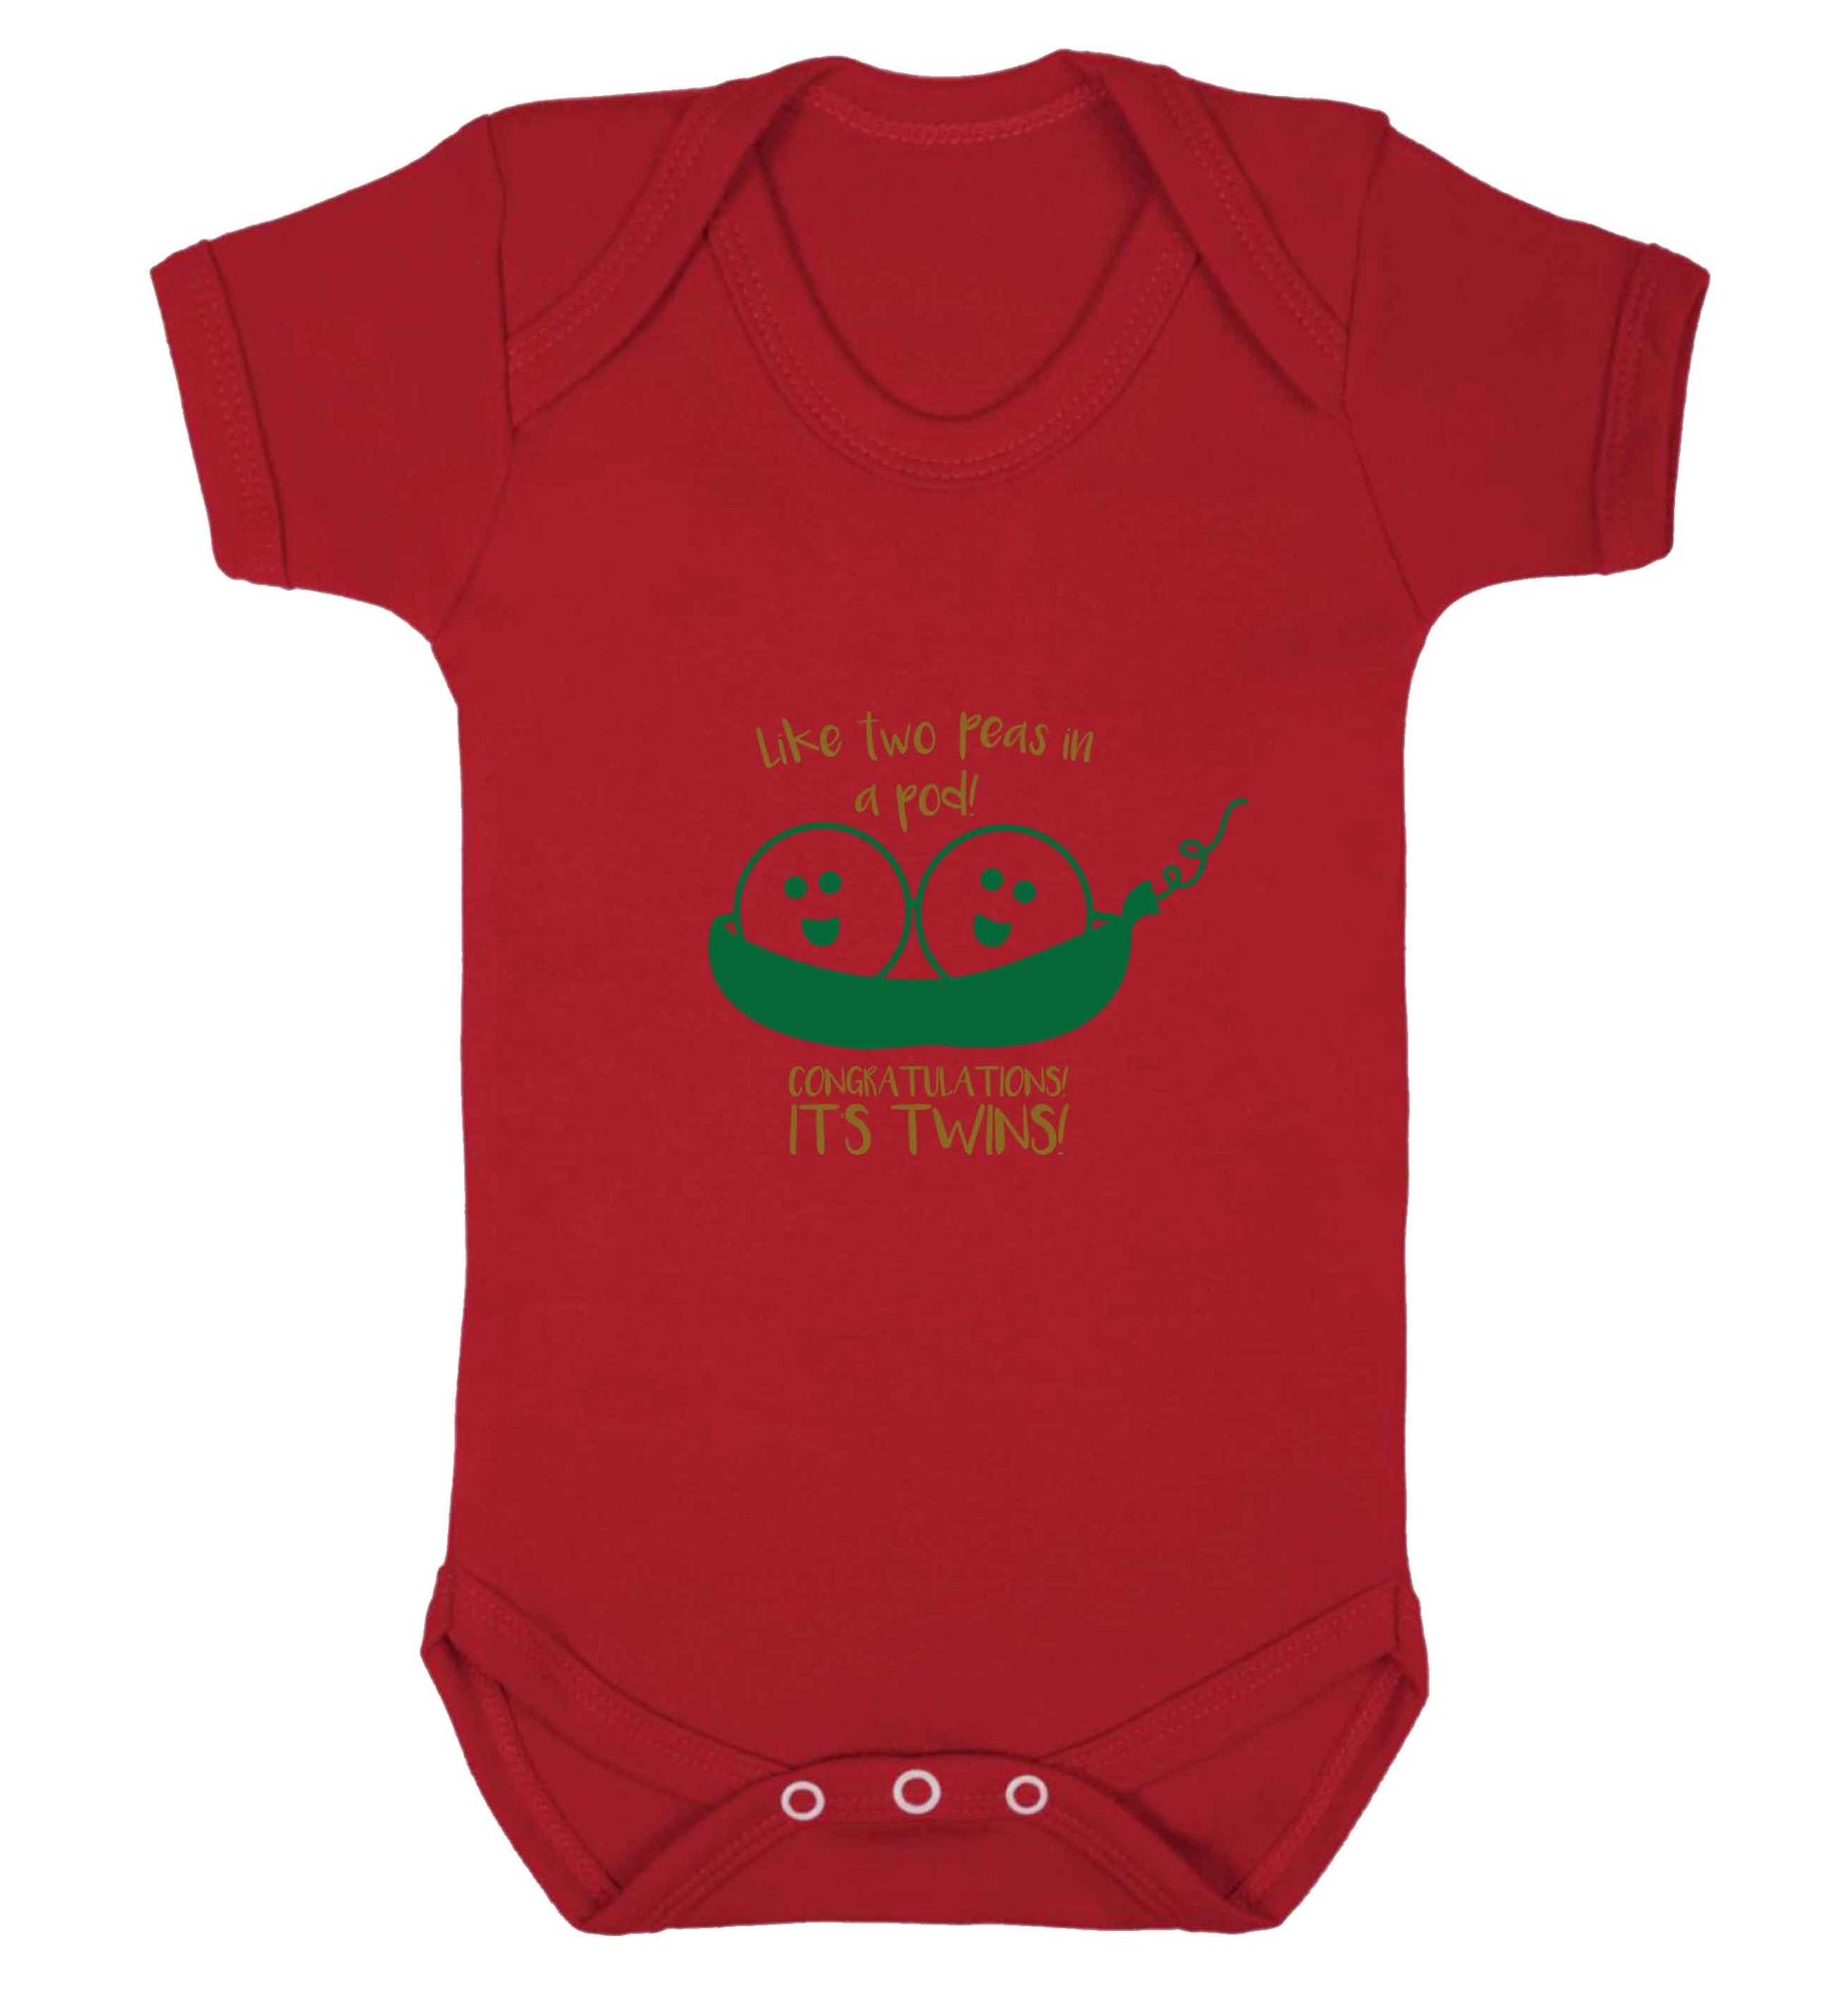 Like two peas in a pod! Congratulations it's twins! baby vest red 18-24 months